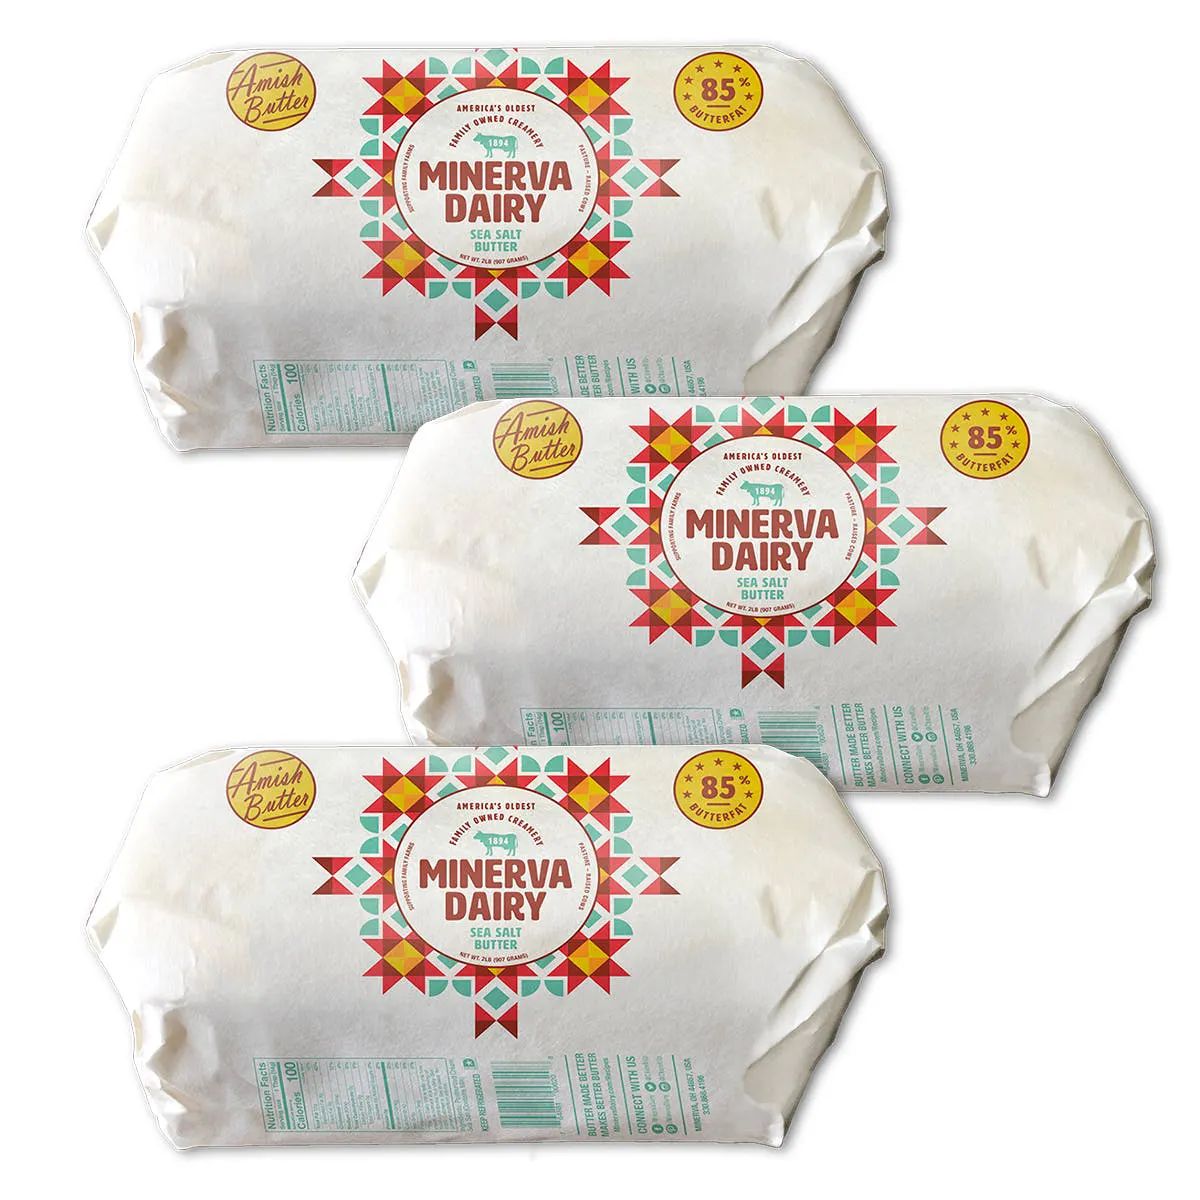 The Original - Amish Roll Butter 6 lbs. by Minerva Dairy | Goldbelly | Goldbelly